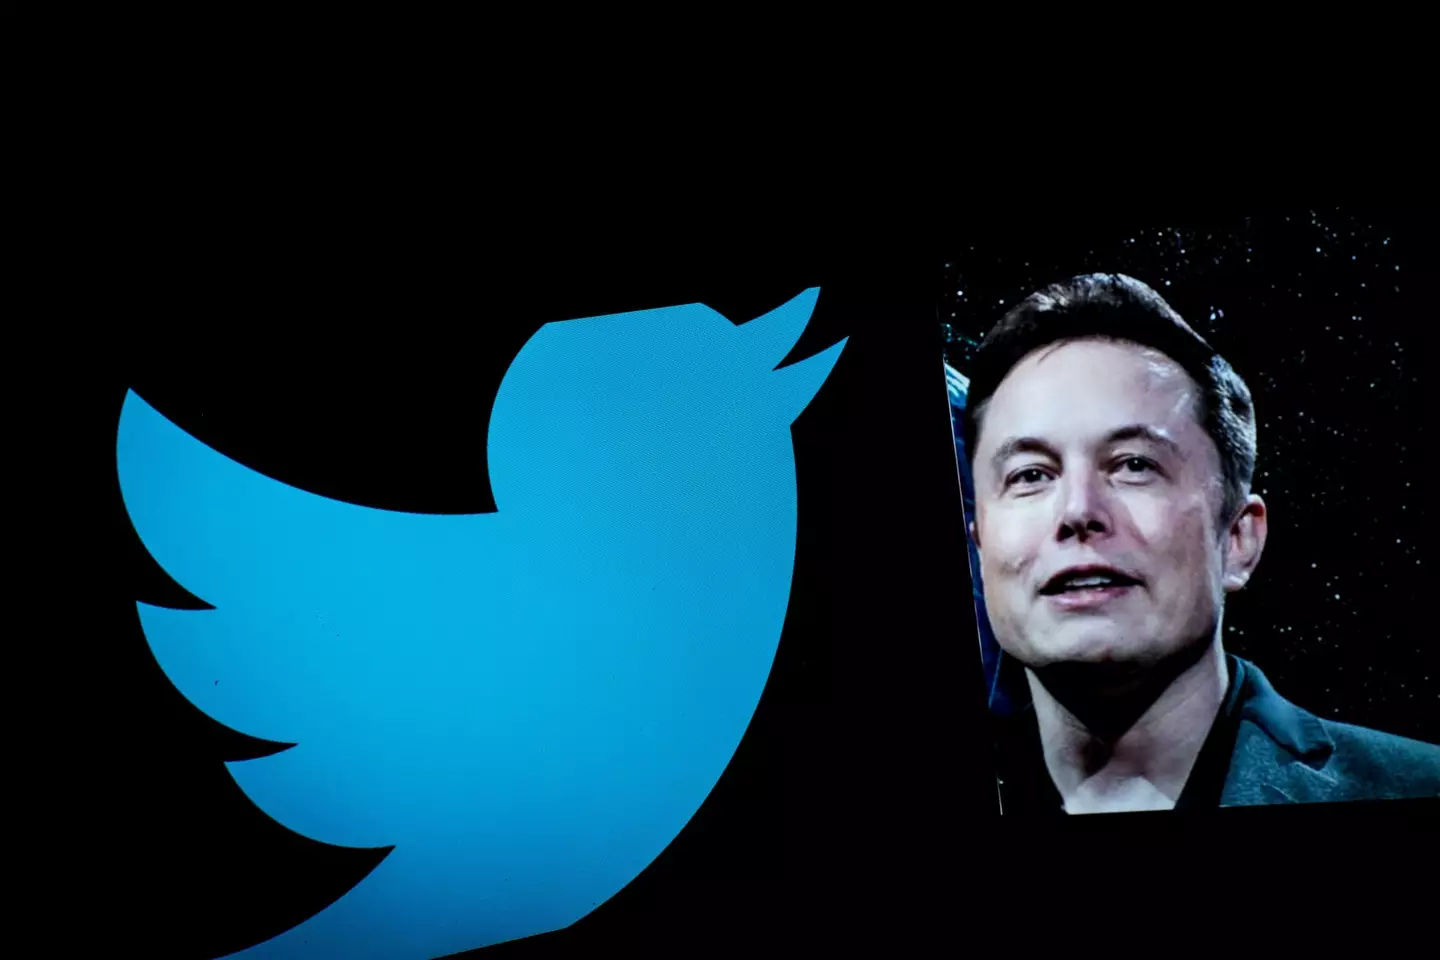 Musk has argued that Twitter is not strong enough on 'free speech'.